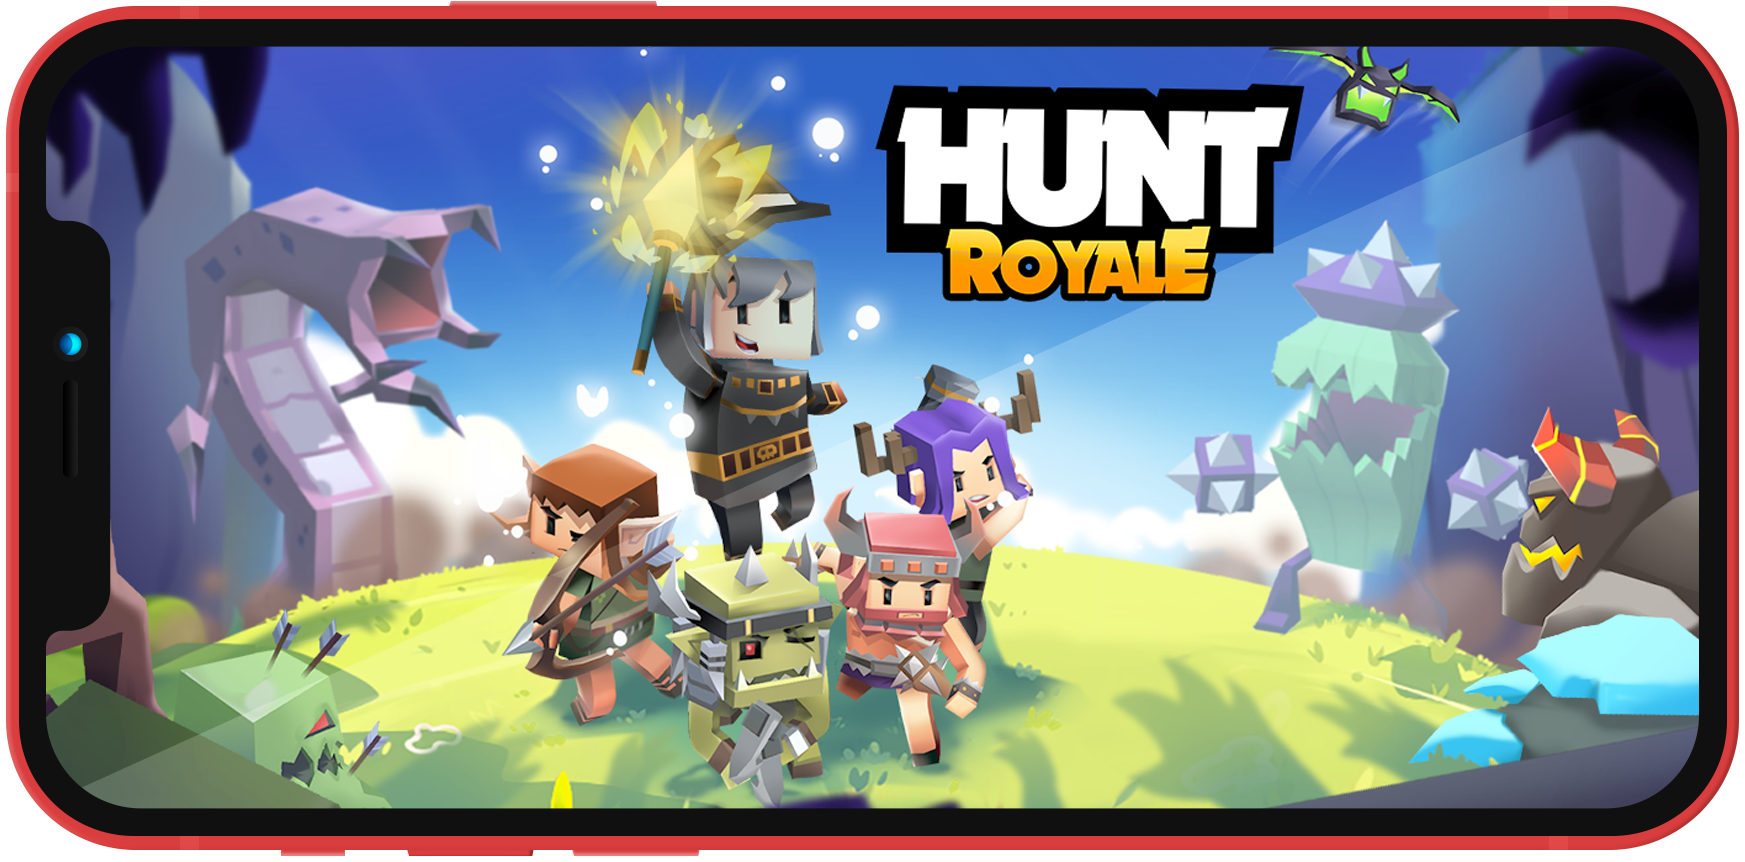 Hunt Royale - 🏹Hunt Royale👑as just been updated to